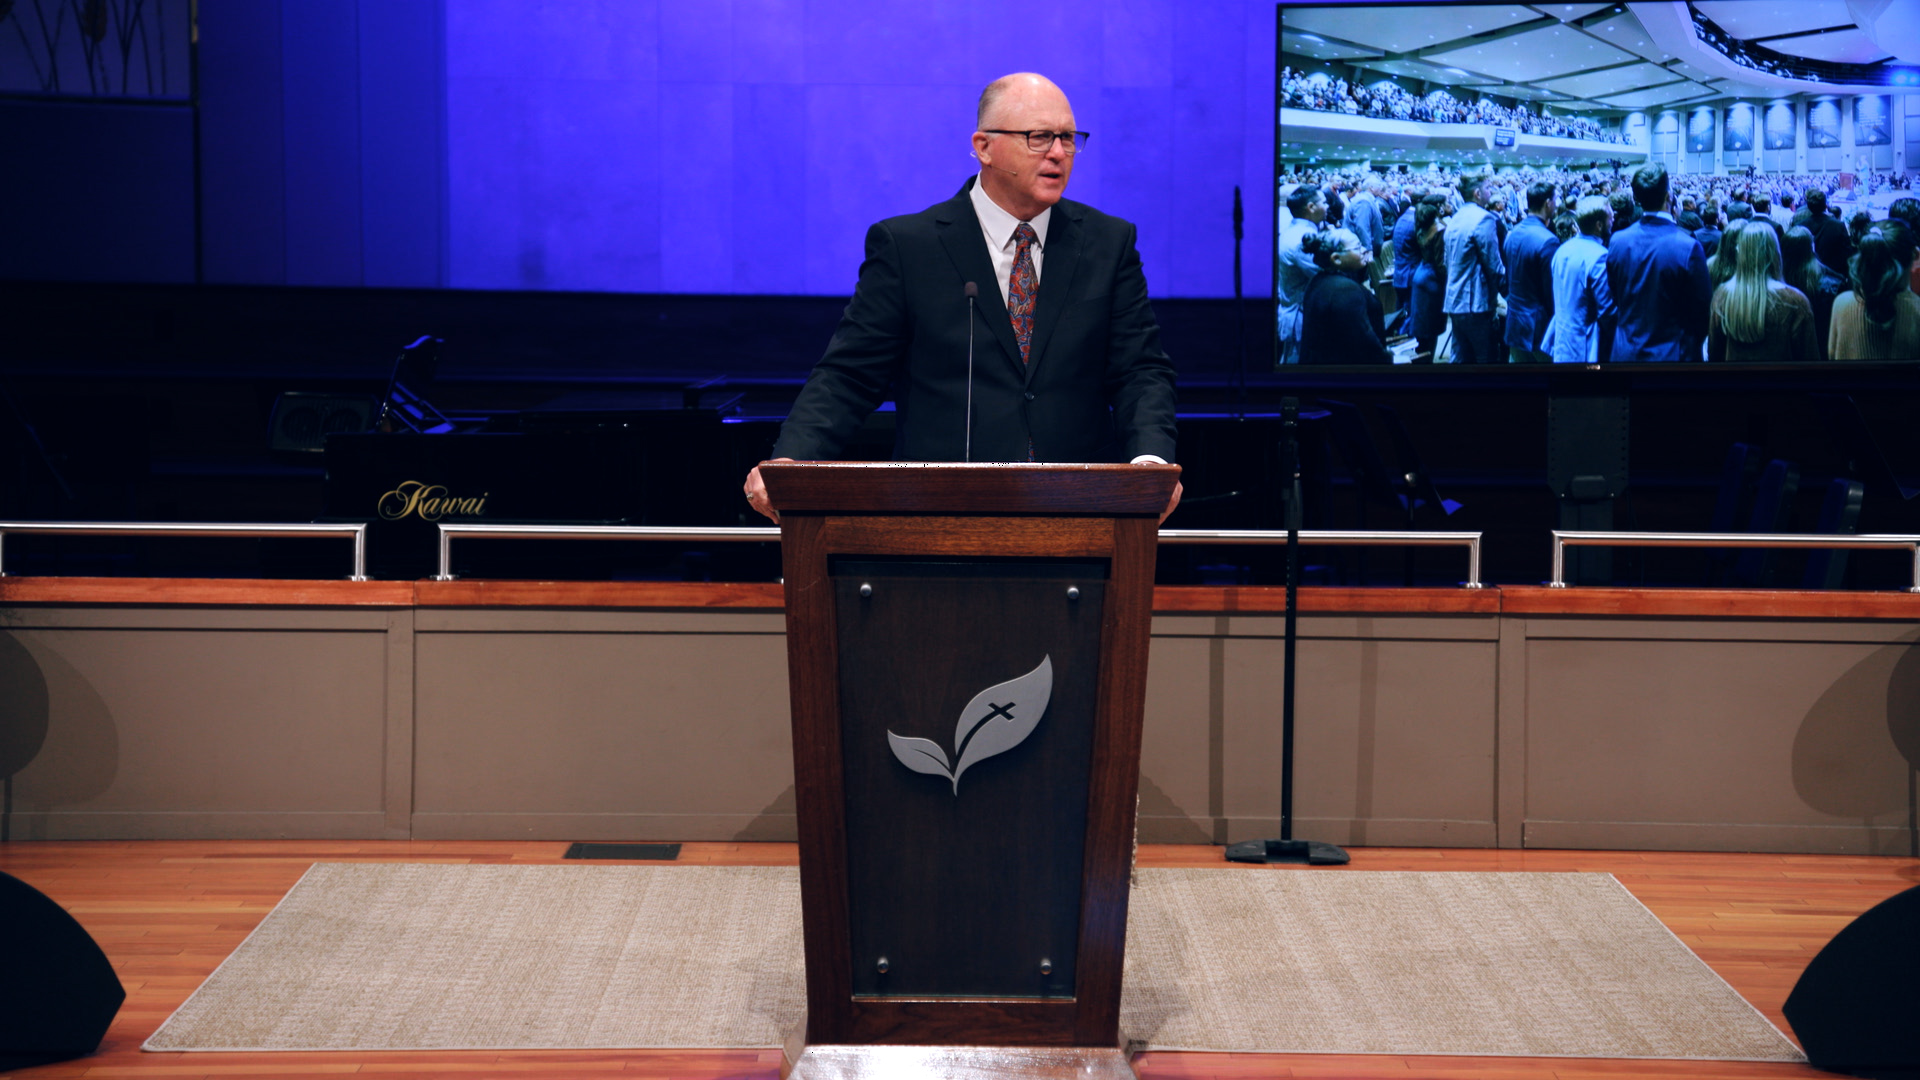 Pastor Paul Chappell: Forward in Courage